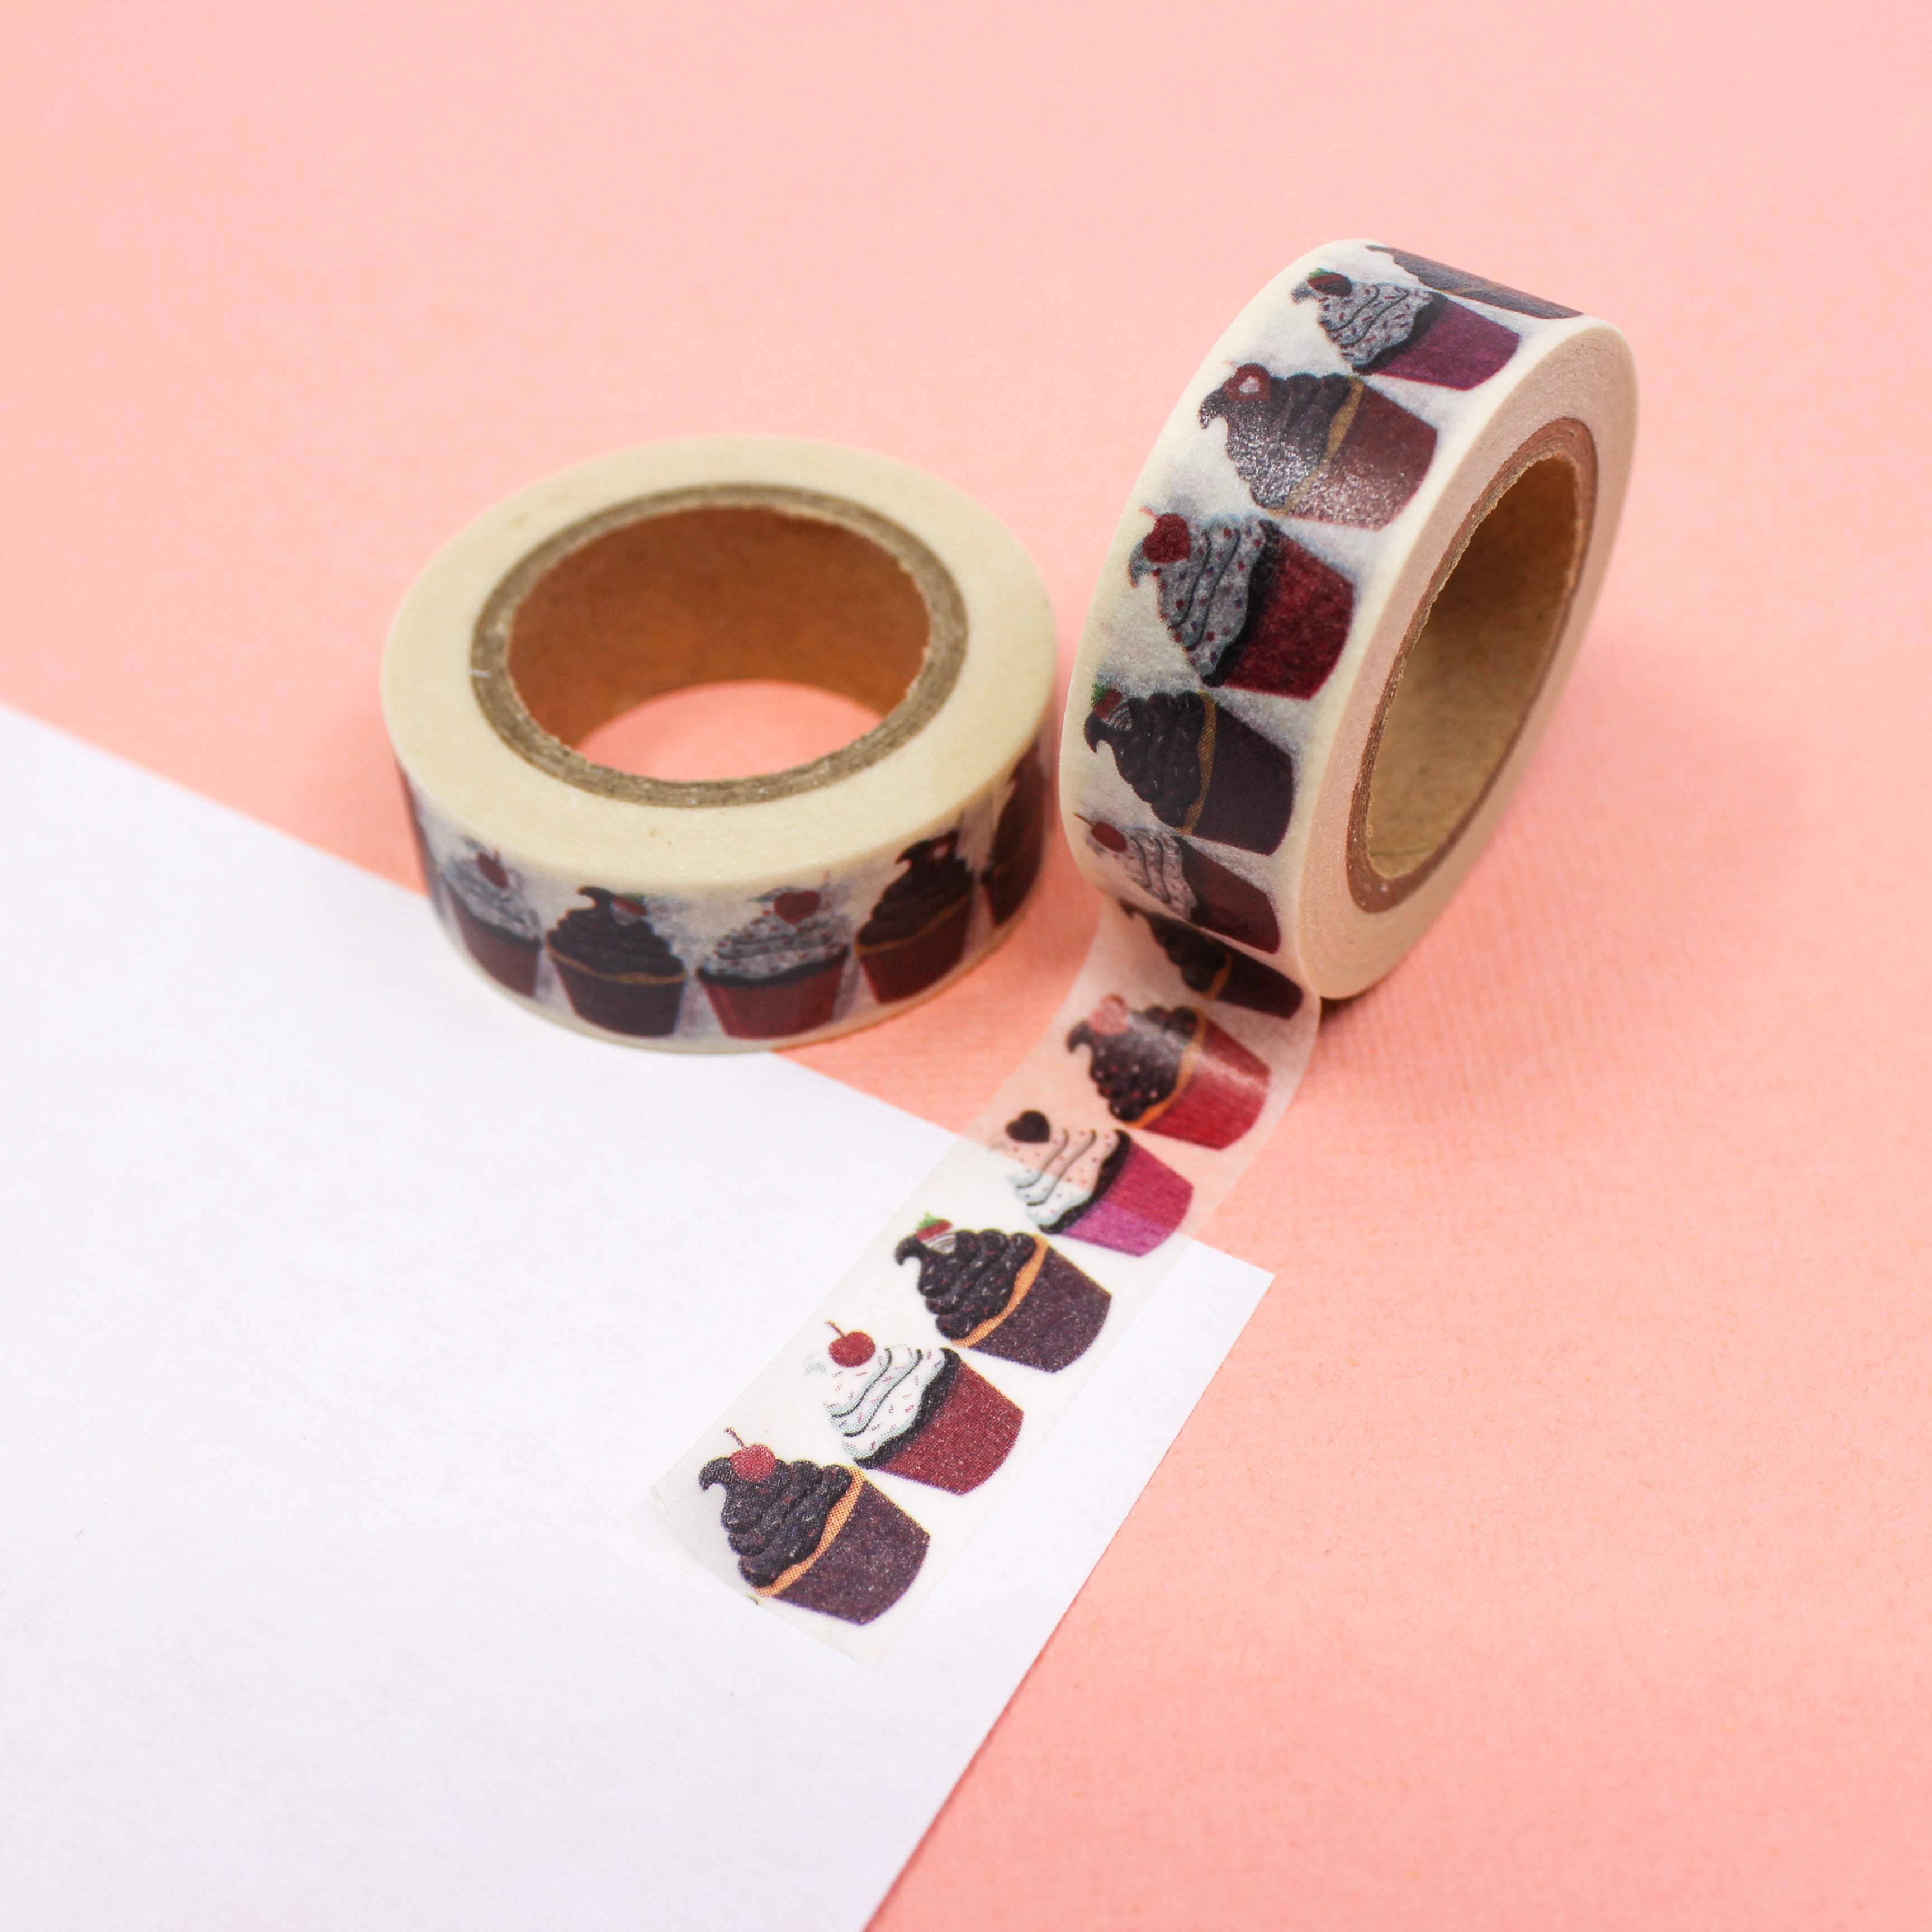 This is a brown choco cupcakes washi tape from BBB Supplies Craft Shop